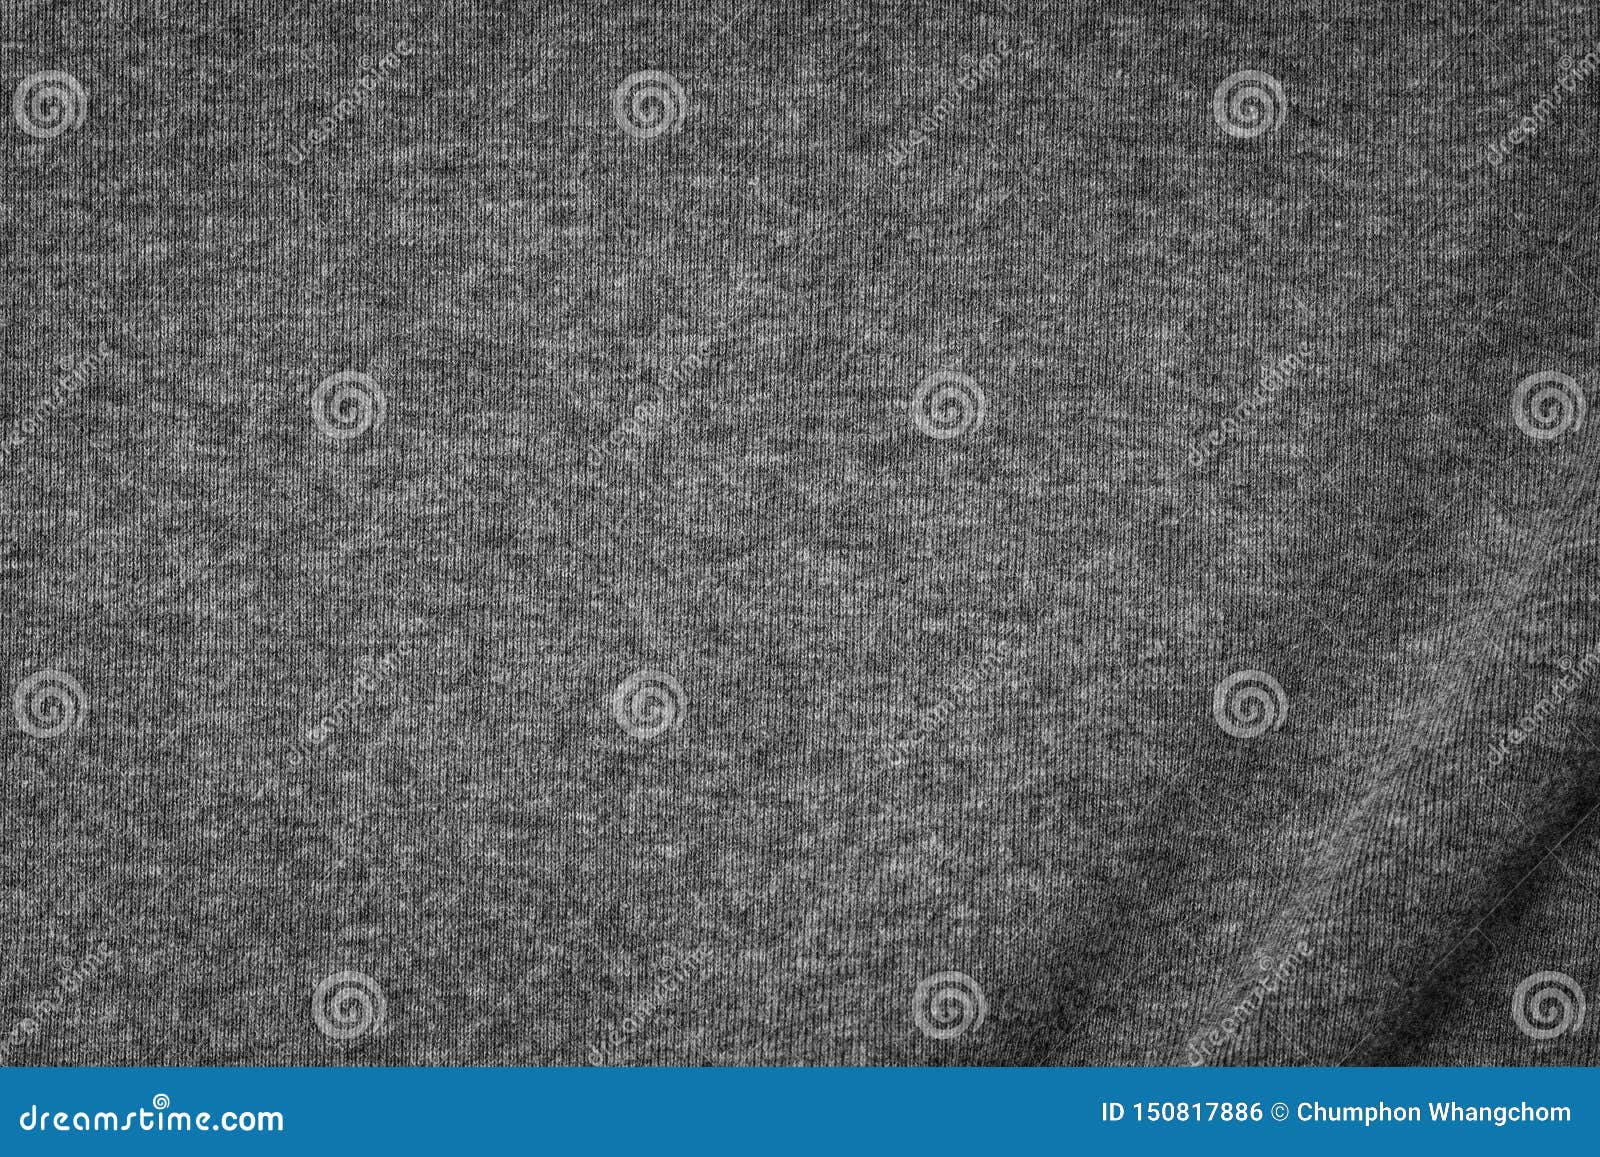 Grey Cotton Texture Background. Detail of Sweater Fabric Surface Stock ...